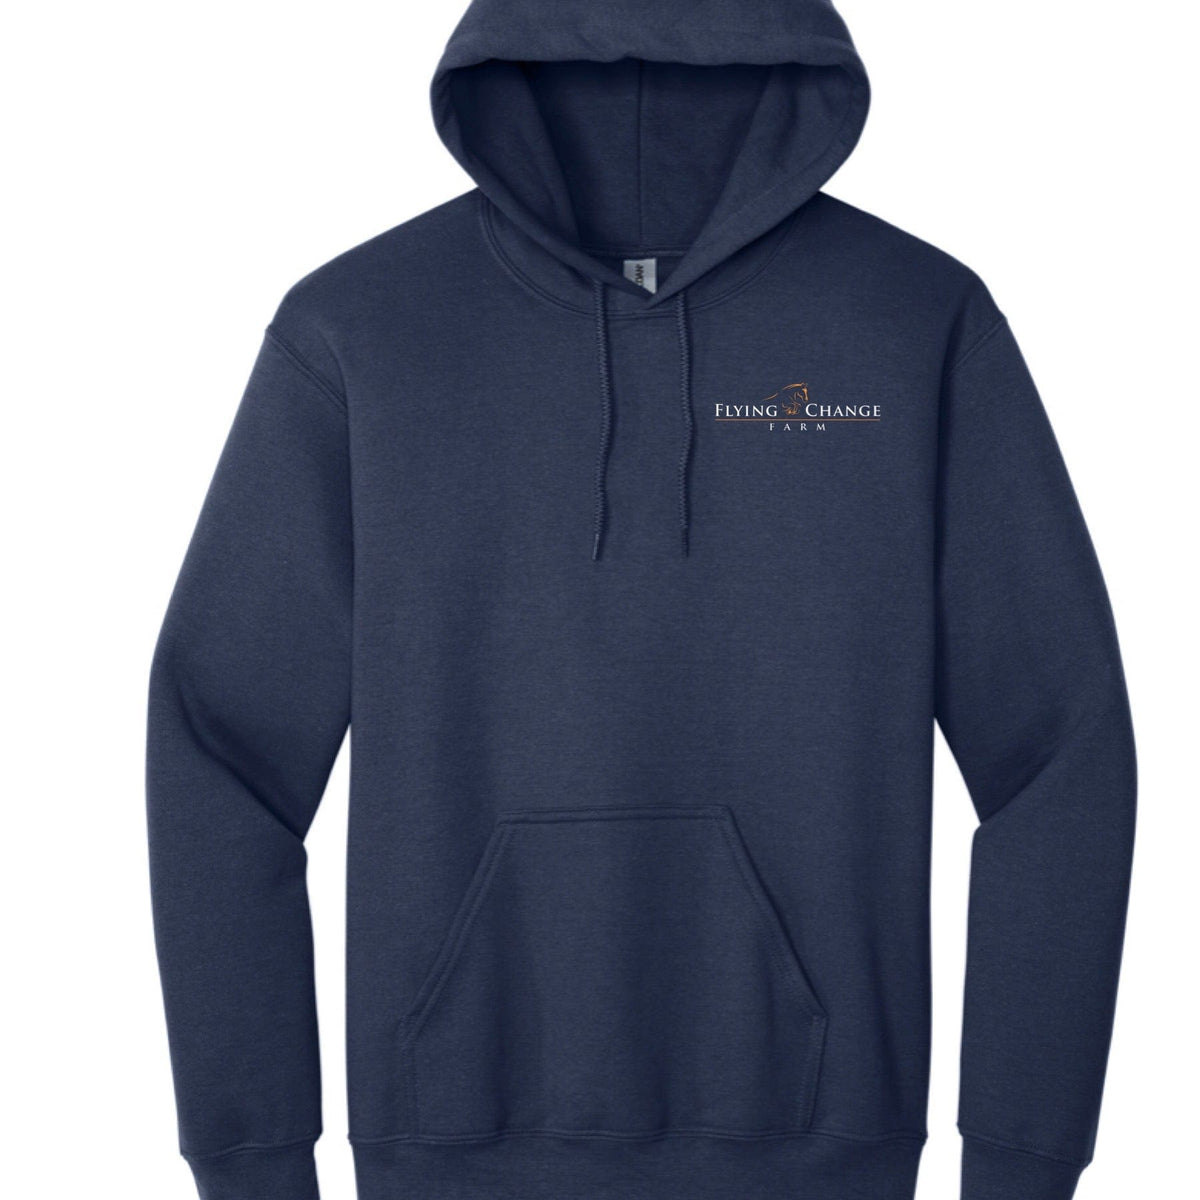 Equestrian Team Apparel Flying Change Farm Hoodie and Sweatshirt equestrian team apparel online tack store mobile tack store custom farm apparel custom show stable clothing equestrian lifestyle horse show clothing riding clothes horses equestrian tack store